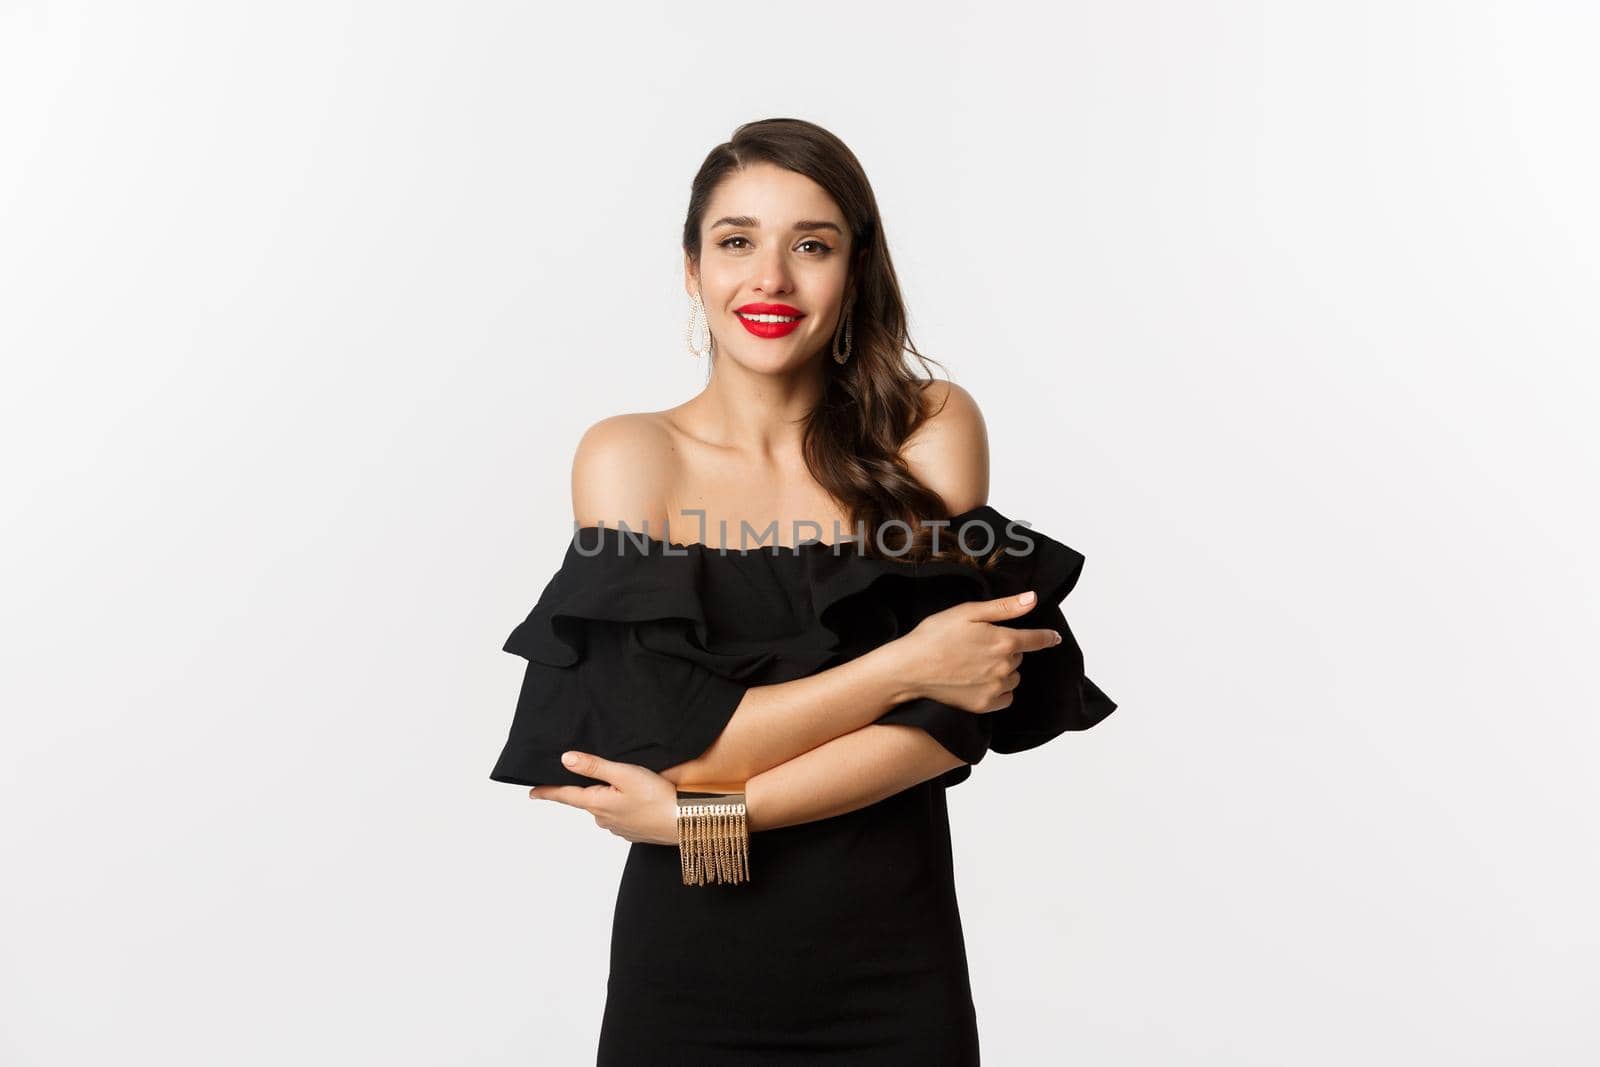 Beauty and fashion concept. Elegant and beautiful woman in black dress, makeup, hugghing herself and looking at camera with sensual gaze, standing over white background.